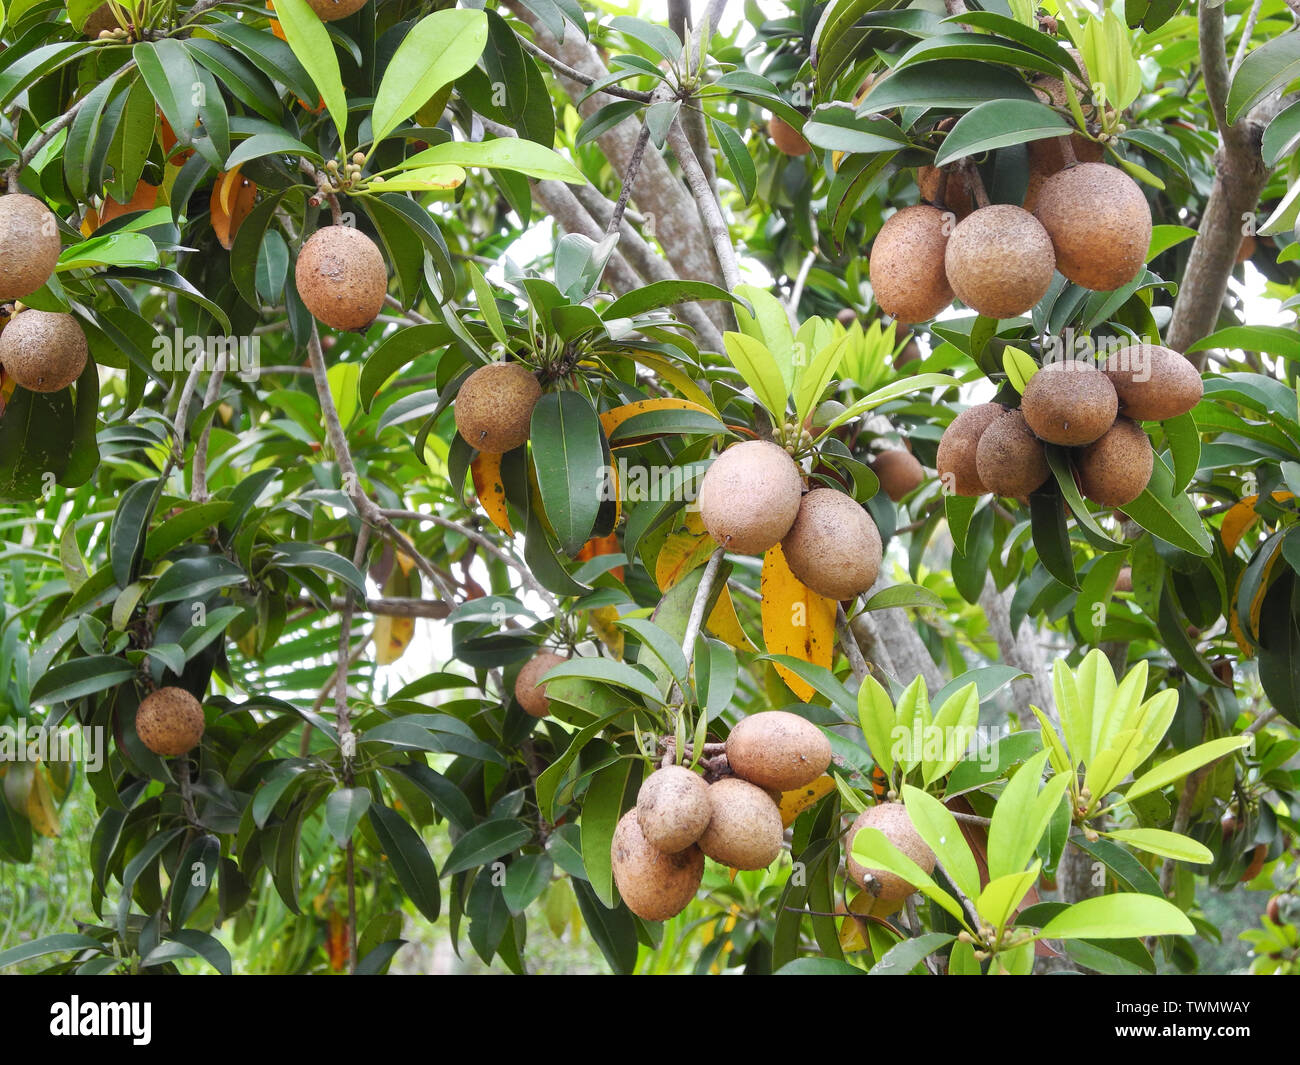 Tropical plant sapodilla with brown fruits and green leaves in Kochi Kerala Stock Photo